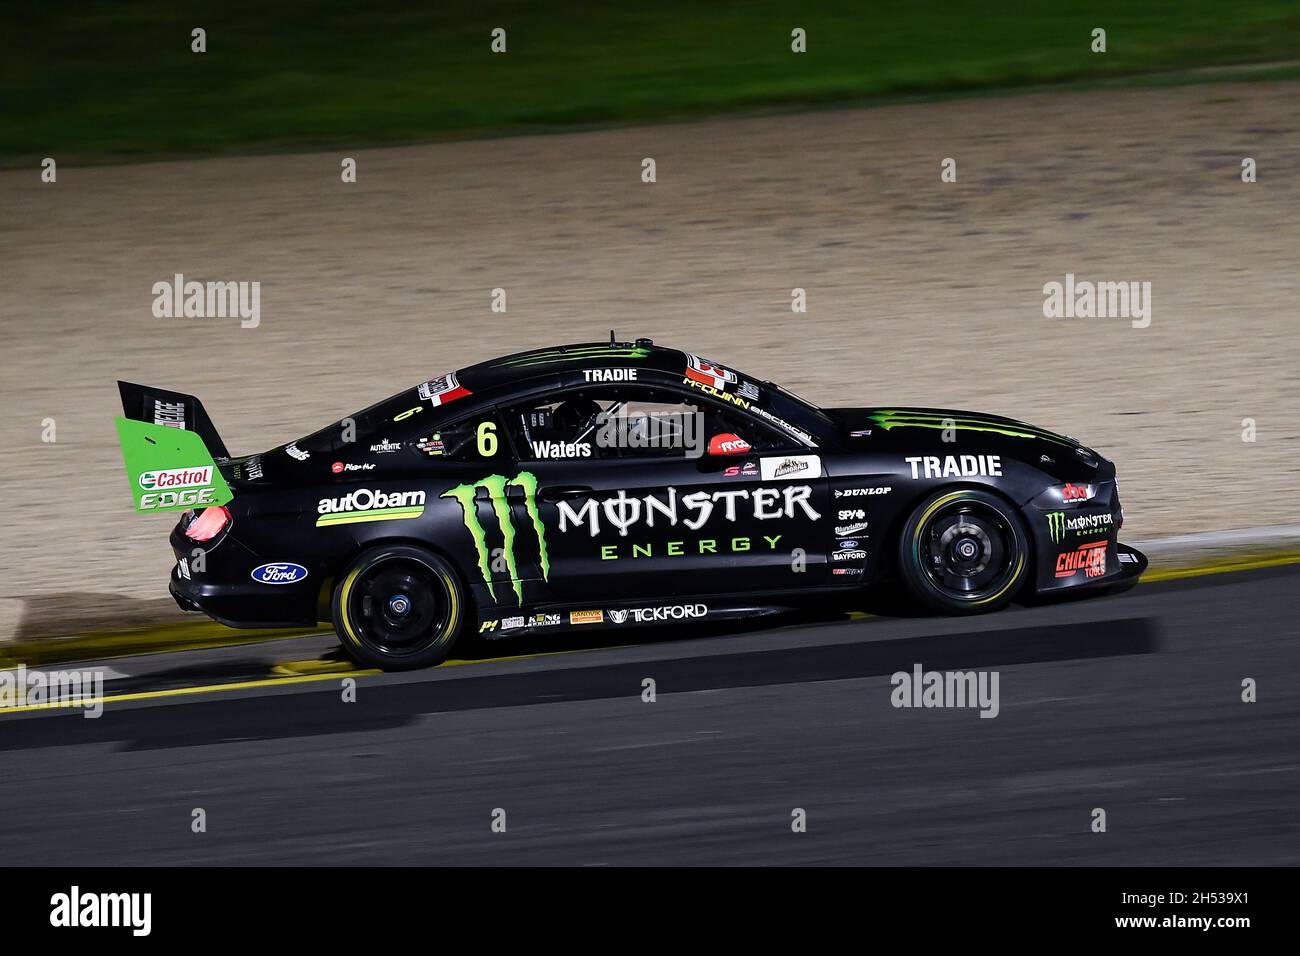 Sydney, Australia, 6 November, 2021. Cameron Waters in the Monster Energy Racing Ford Mustang during the V8 Supercars Sydney SuperNight at Sydney Motorsport Park, on November 07, 2021 in Sydney, Australia. Credit: Steven Markham/Speed Media/Alamy Live News Stock Photo